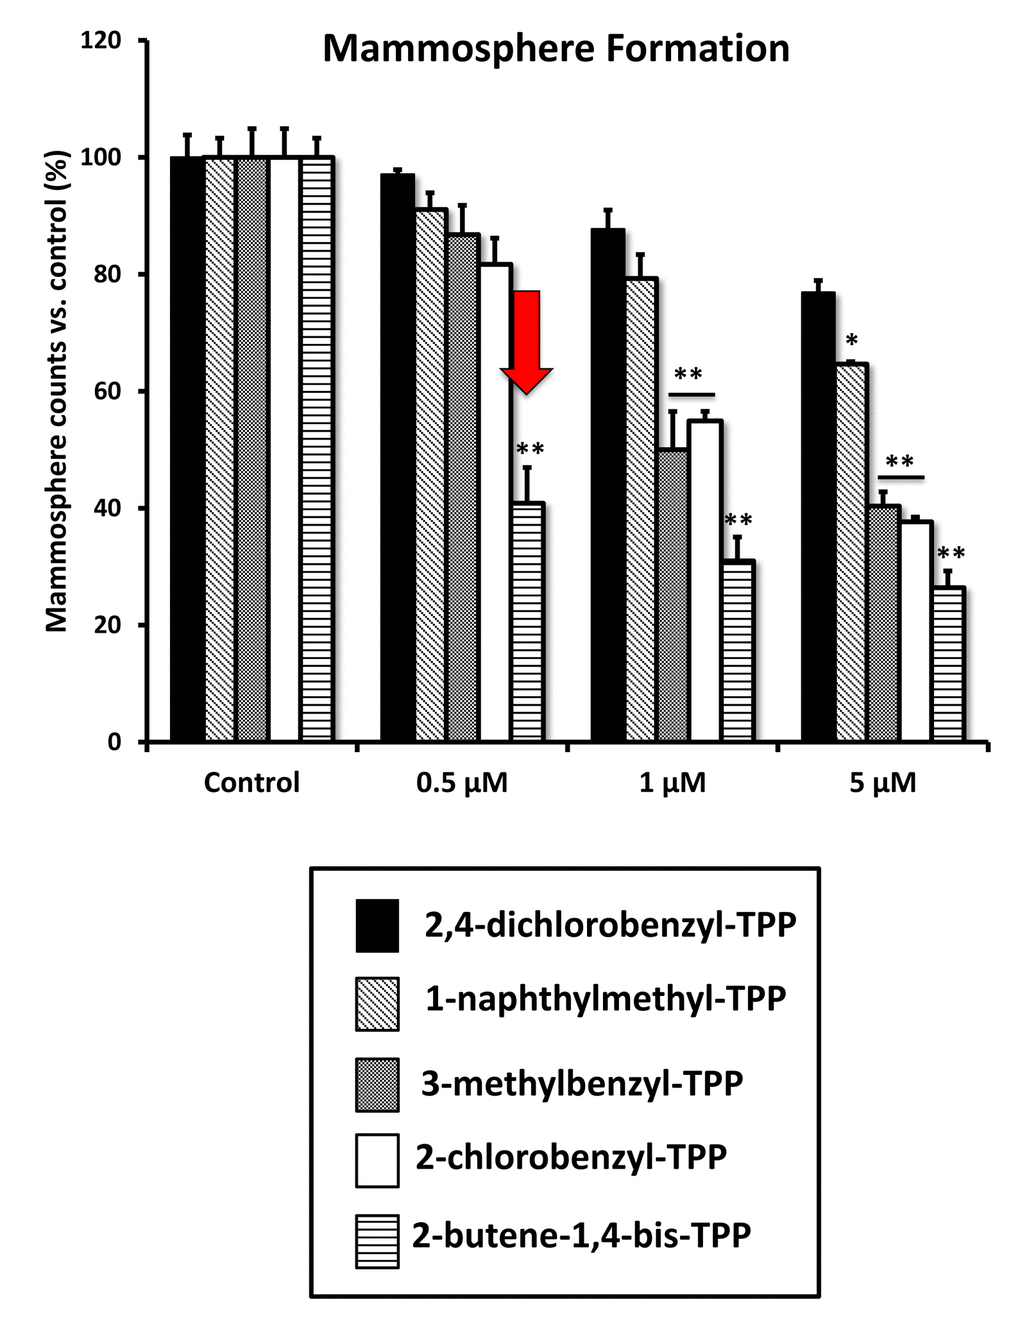 Differential inhibition of the mammosphere-forming activity of MCF-7 breast CSCs, after treatment with various TPP derivatives. 2,4-dichlorobenzyl-TPP (black); 1-naphthylmethyl-TPP (inclined lines); 3-methylbenzyl-TPP (dotted lines); 2-chlorobenzyl-TPP (white); 2-butene-1,4-bis-TPP (horizontal lines). Cells were treated for 5 days in mammosphere media. Data are represented as mean +/- SEM. Note that 2-butene-1,4-bis-TPP was the most effective compound for blocking CSC propagation, with an IC-50 less than 500 nM. *p 